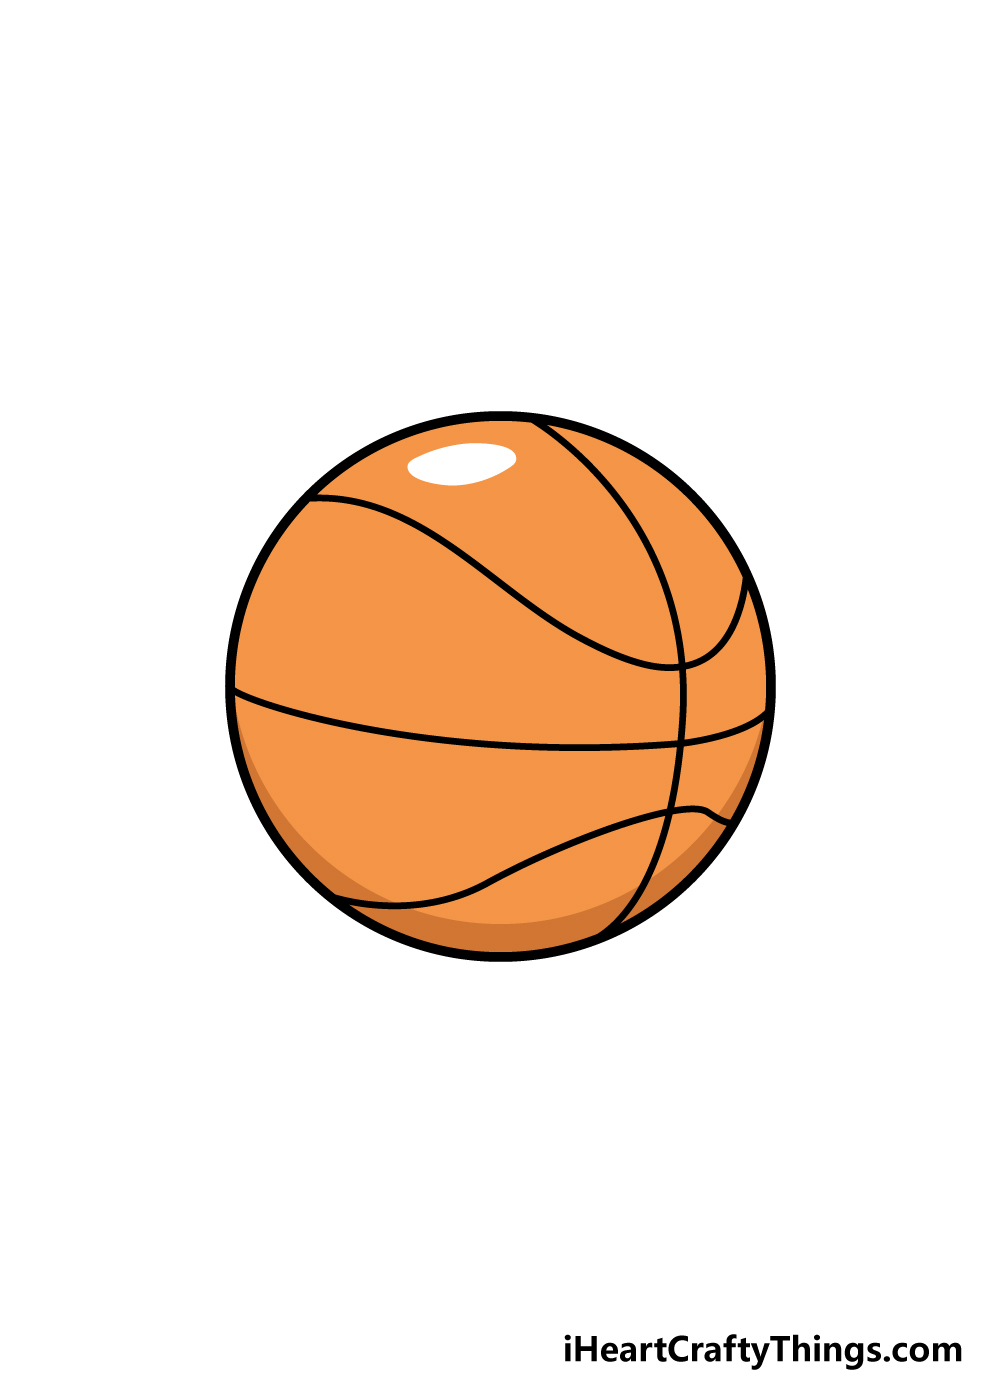 Basketball Drawing How To Draw A Basketball Step By Step